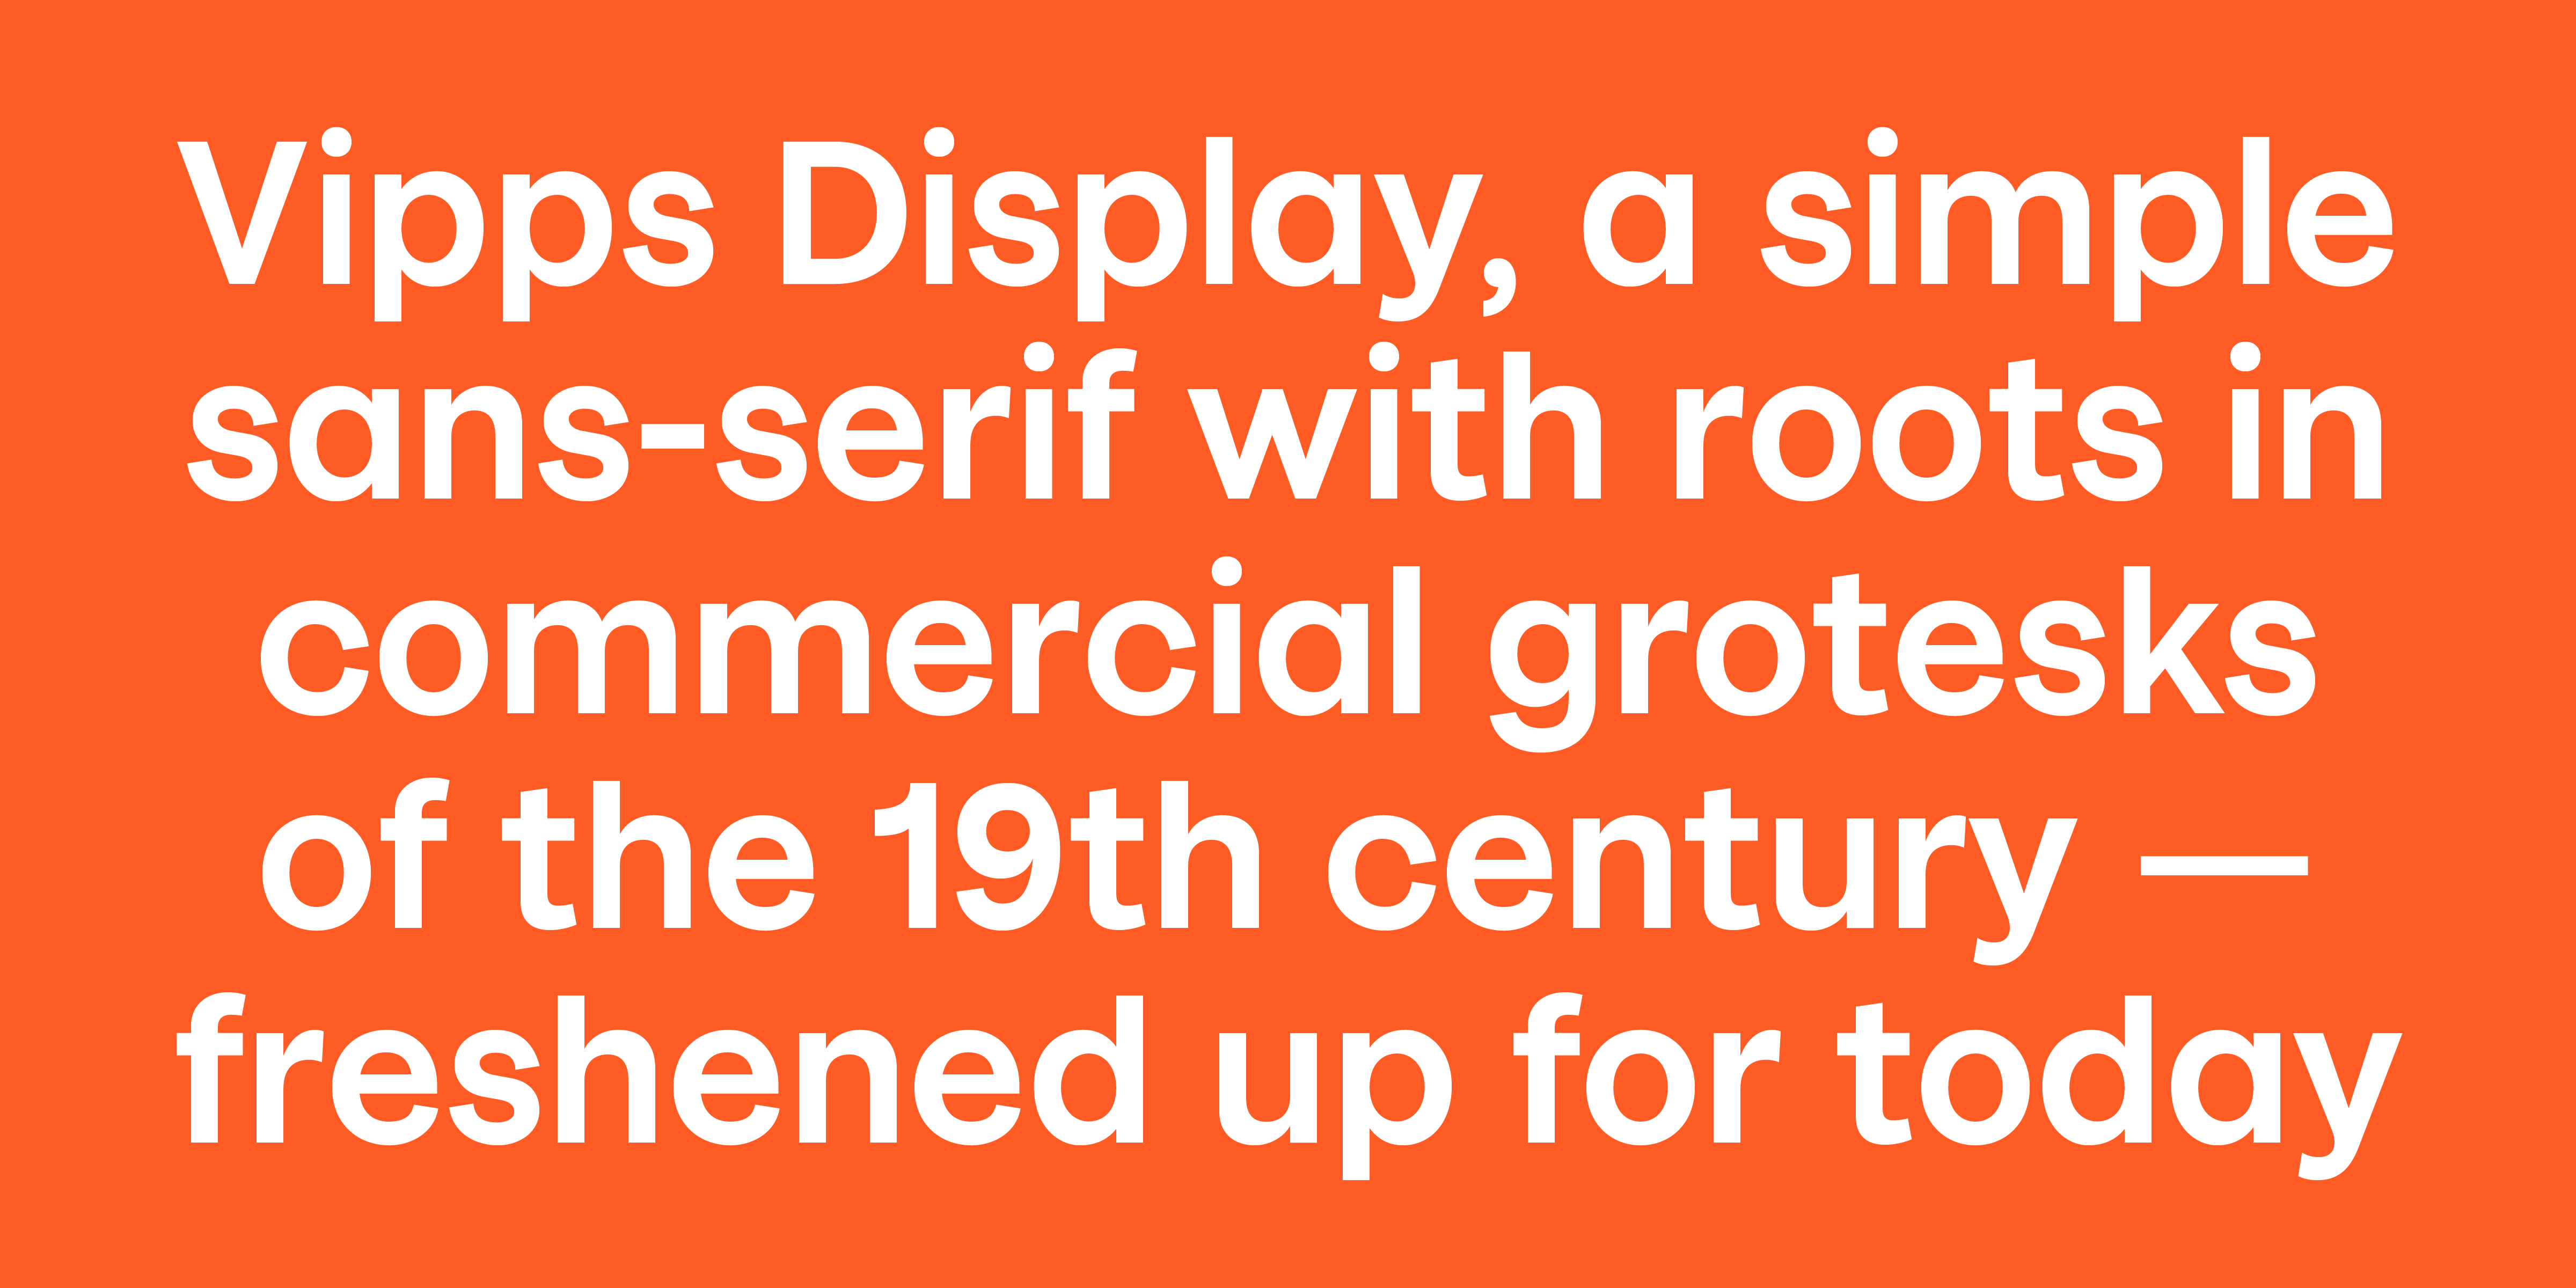 Vipps Display, a simple sans-serif based on 19th century merchants’ grotesks, with a friendly proportion and a few distinctive curves that make it feel fresh and modern.